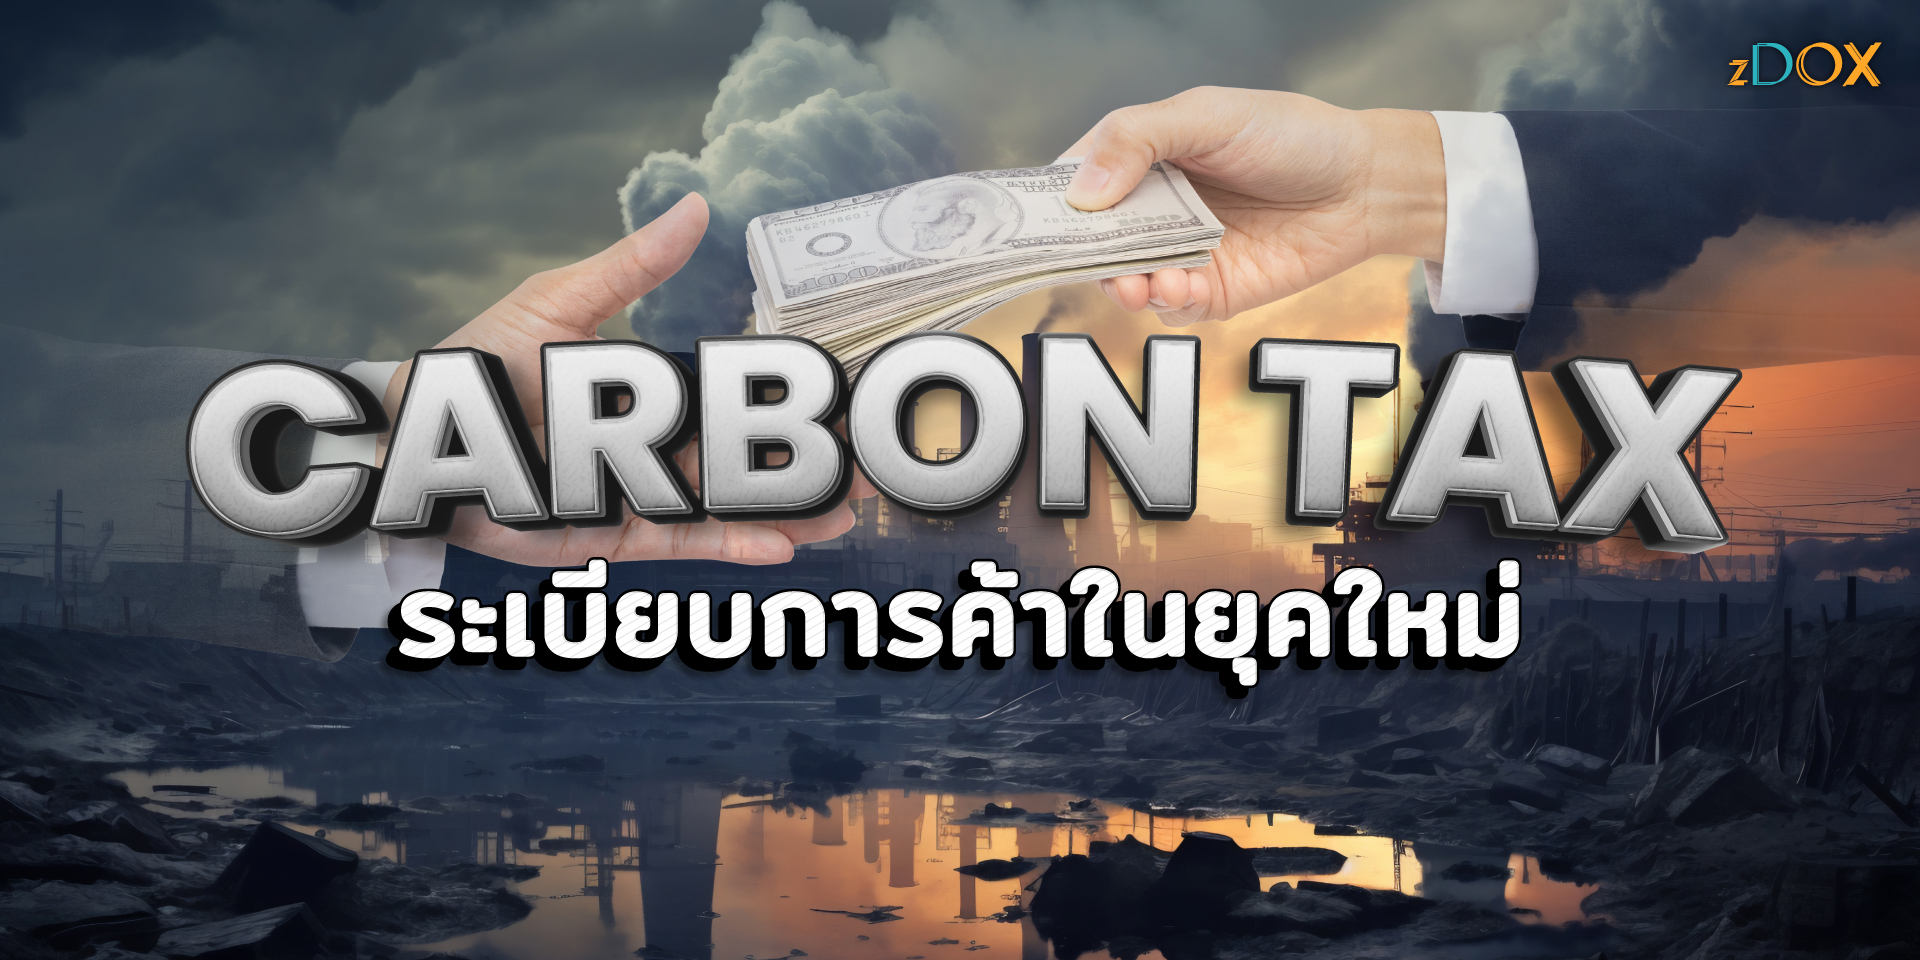 You are currently viewing CARBON TAX ระเบียบการค้าในยุคใหม่